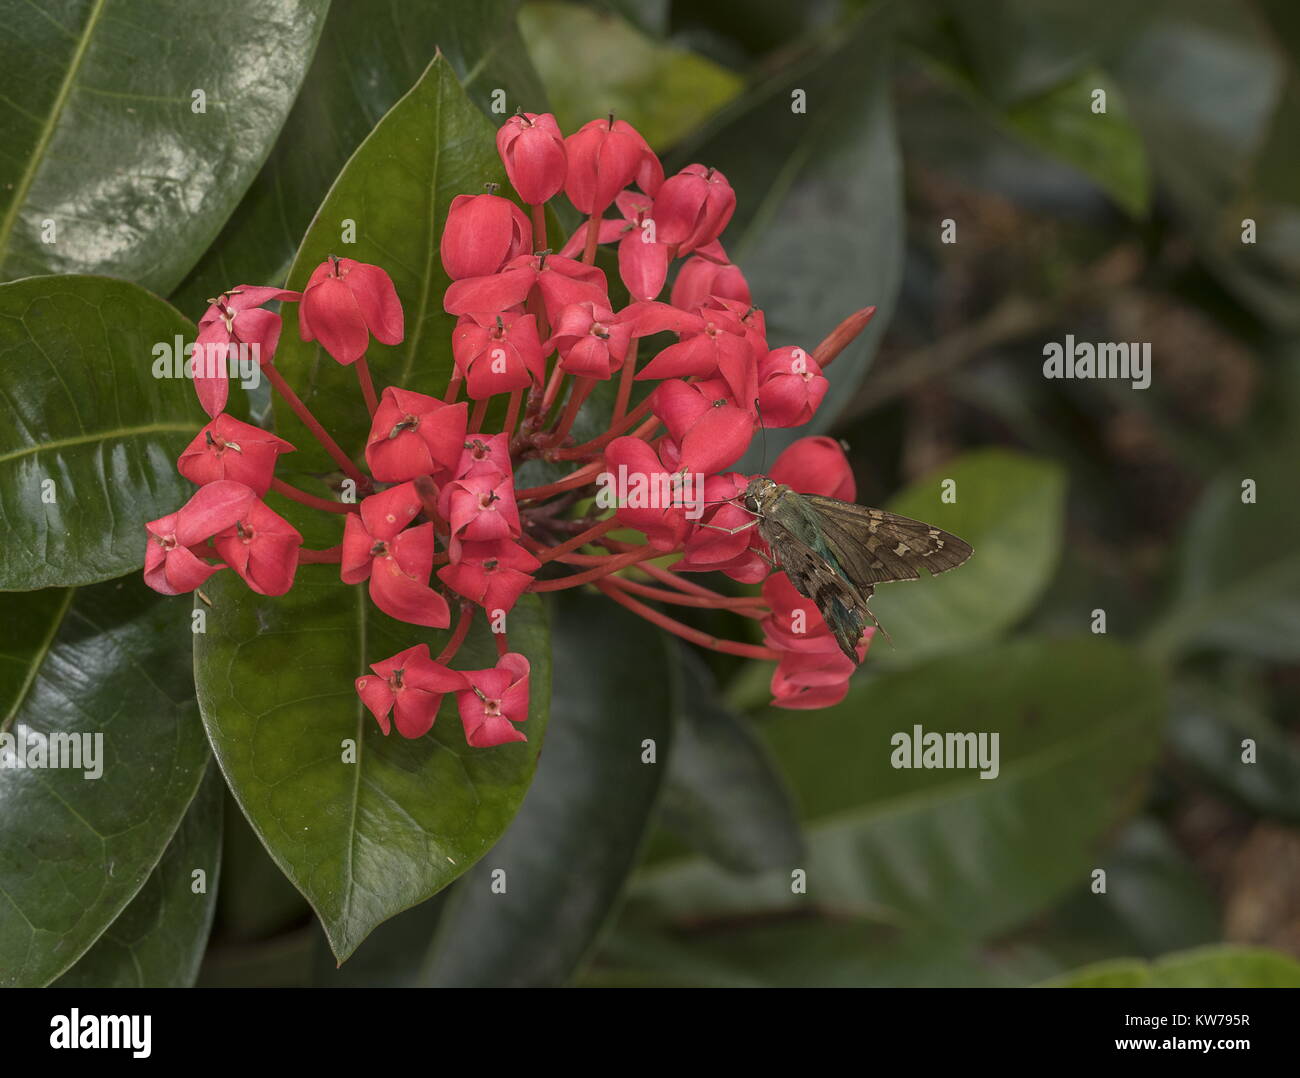 Maui Red Ixora, Ixora coccinea 'Maui Red' being visited by Long-tailed Skipper, Urbanus proteus (missing its tails). Florida garden. Stock Photo